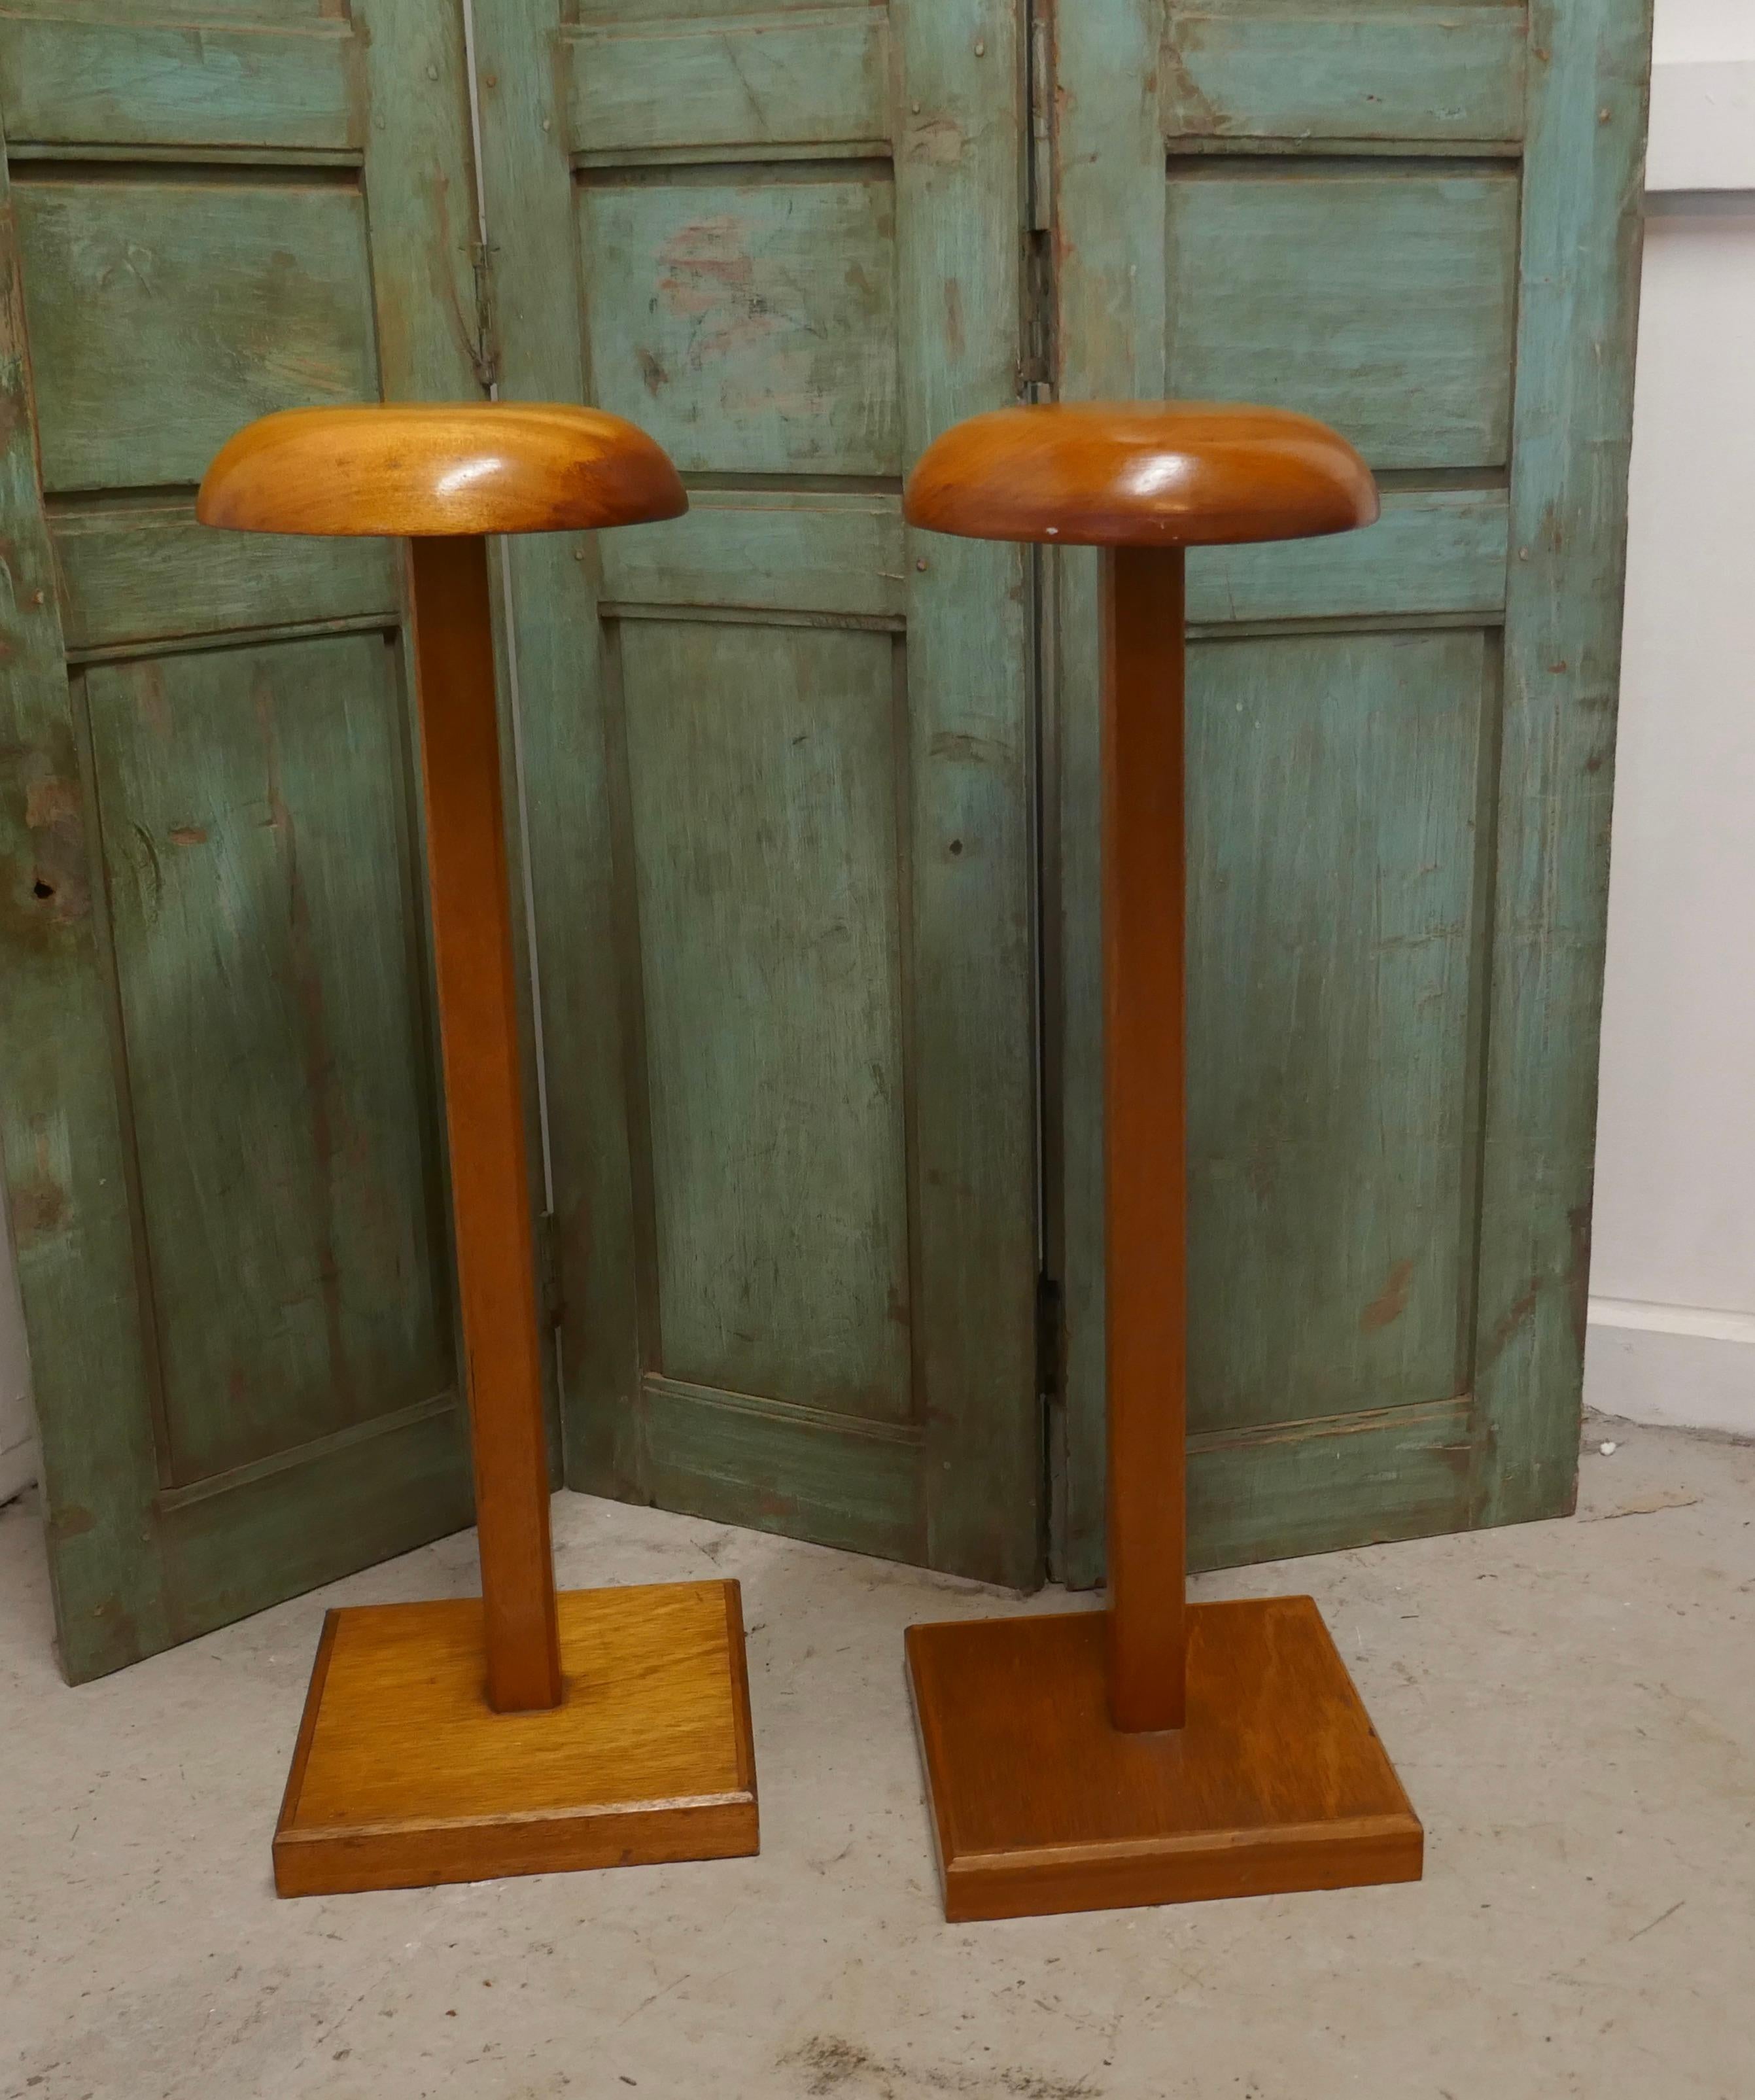 wooden stands for display